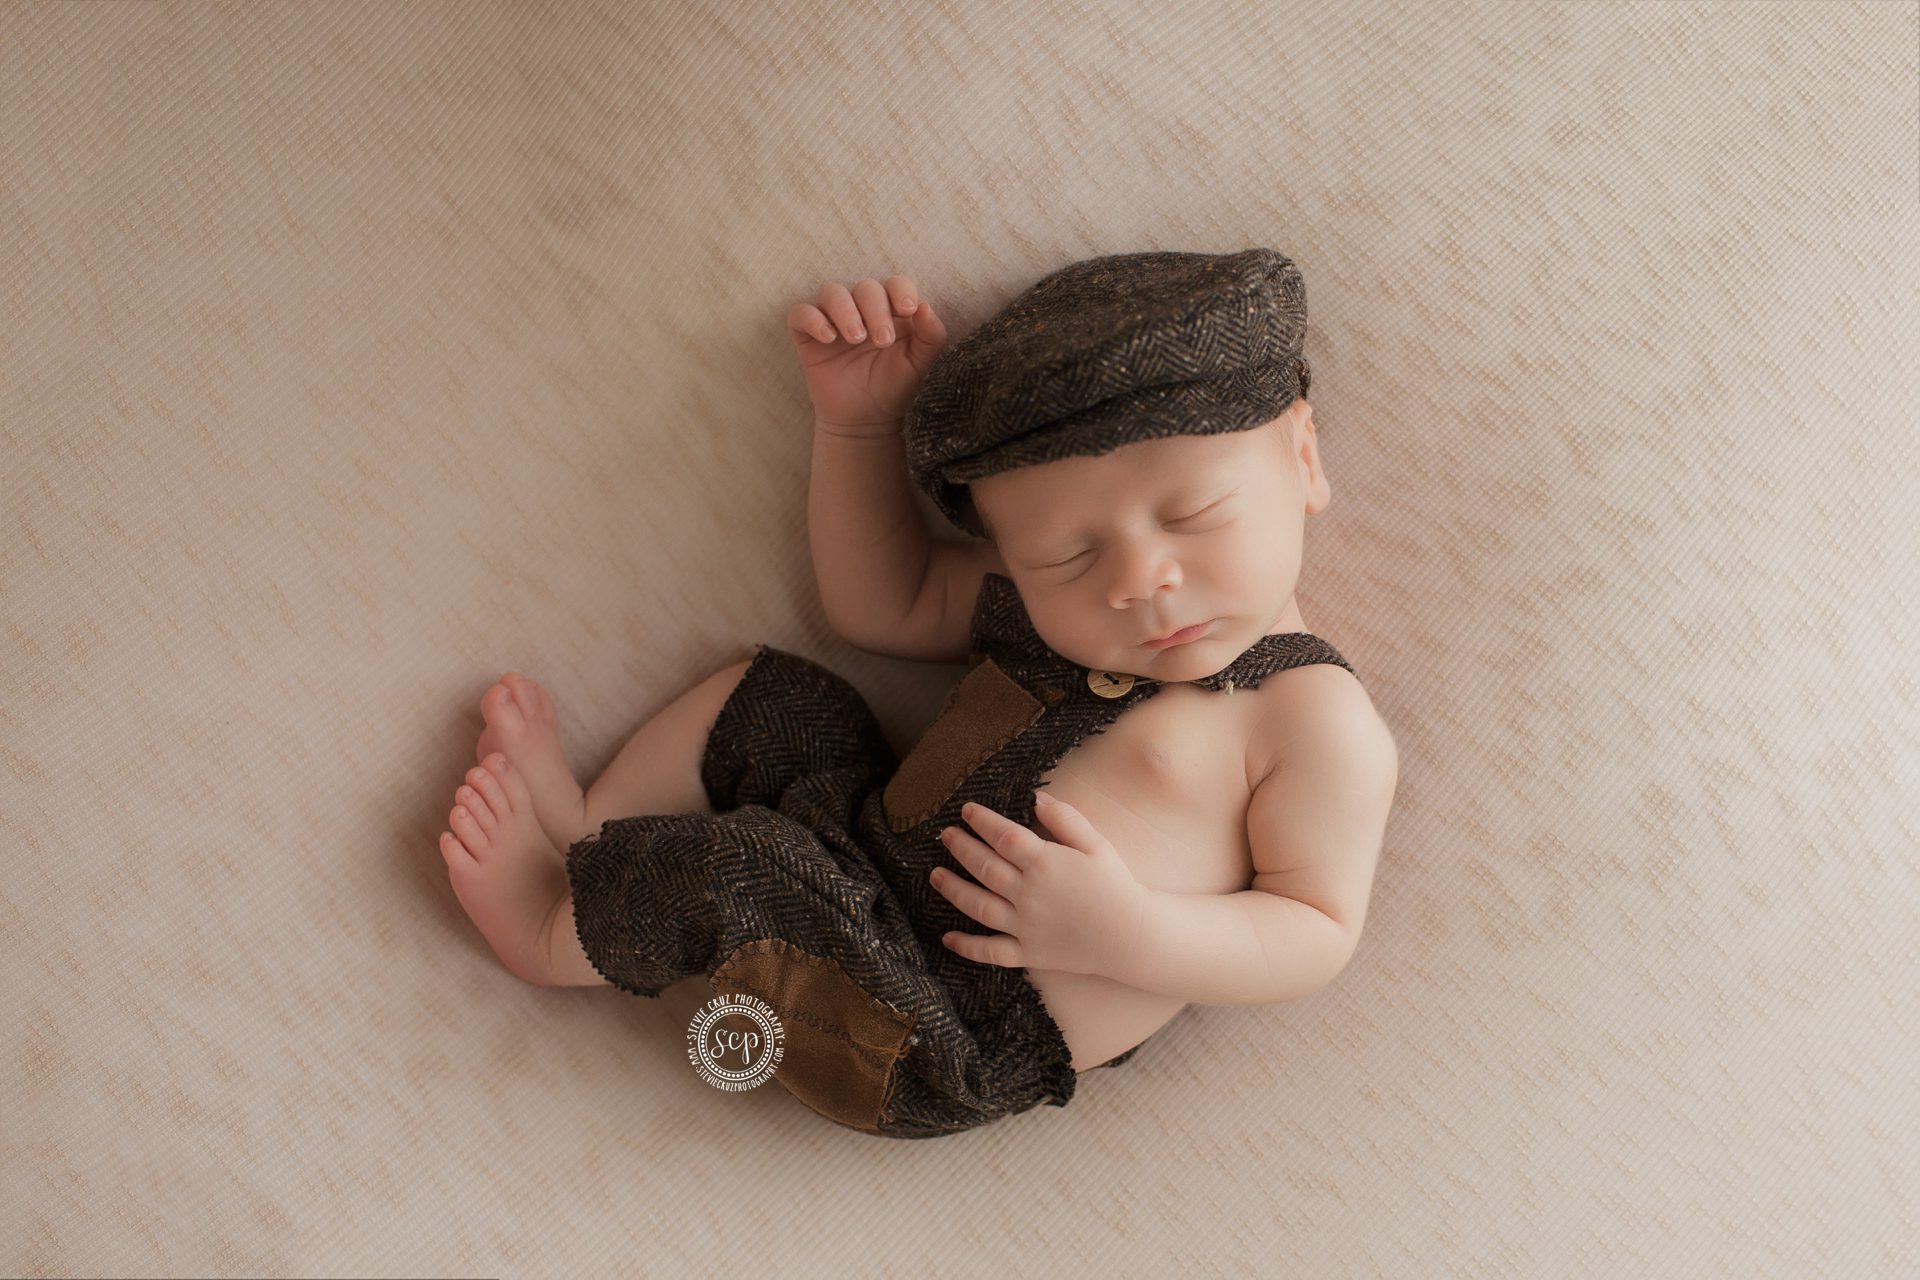 newborn vintage outfit ideas for baby boys.